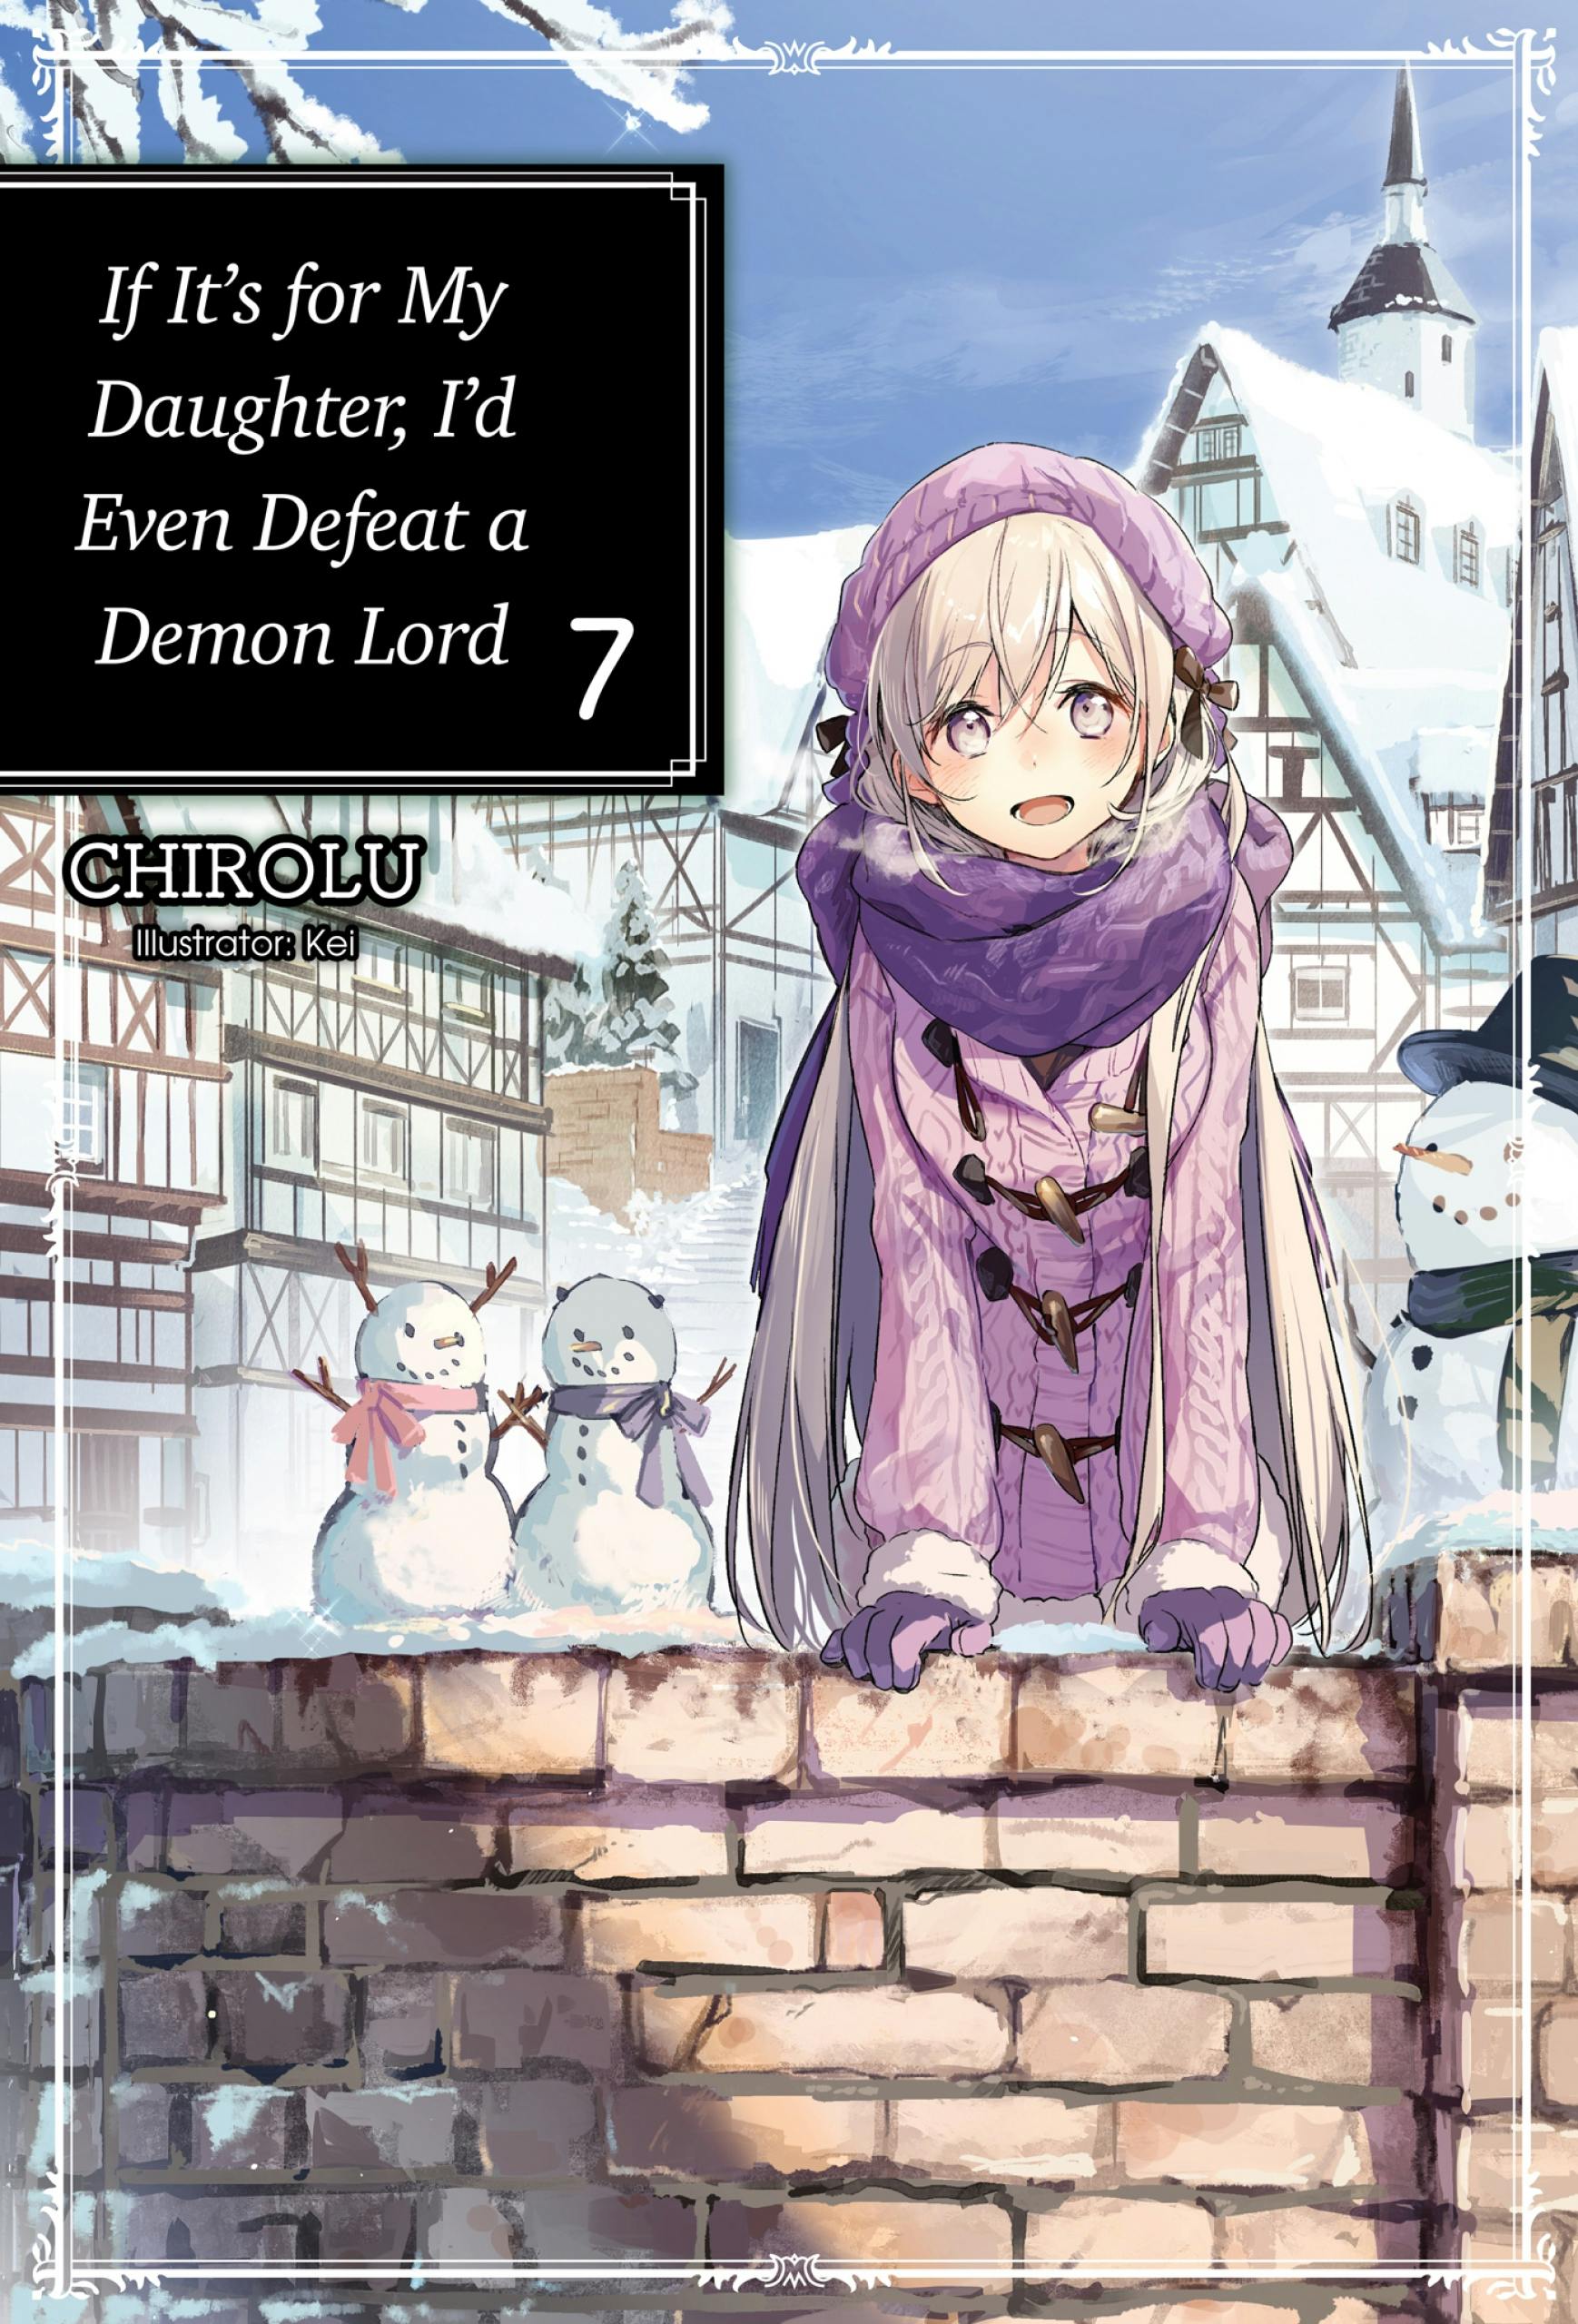 If It’s for My Daughter, I’d Even Defeat a Demon Lord: Volume 7 - CHIROLU